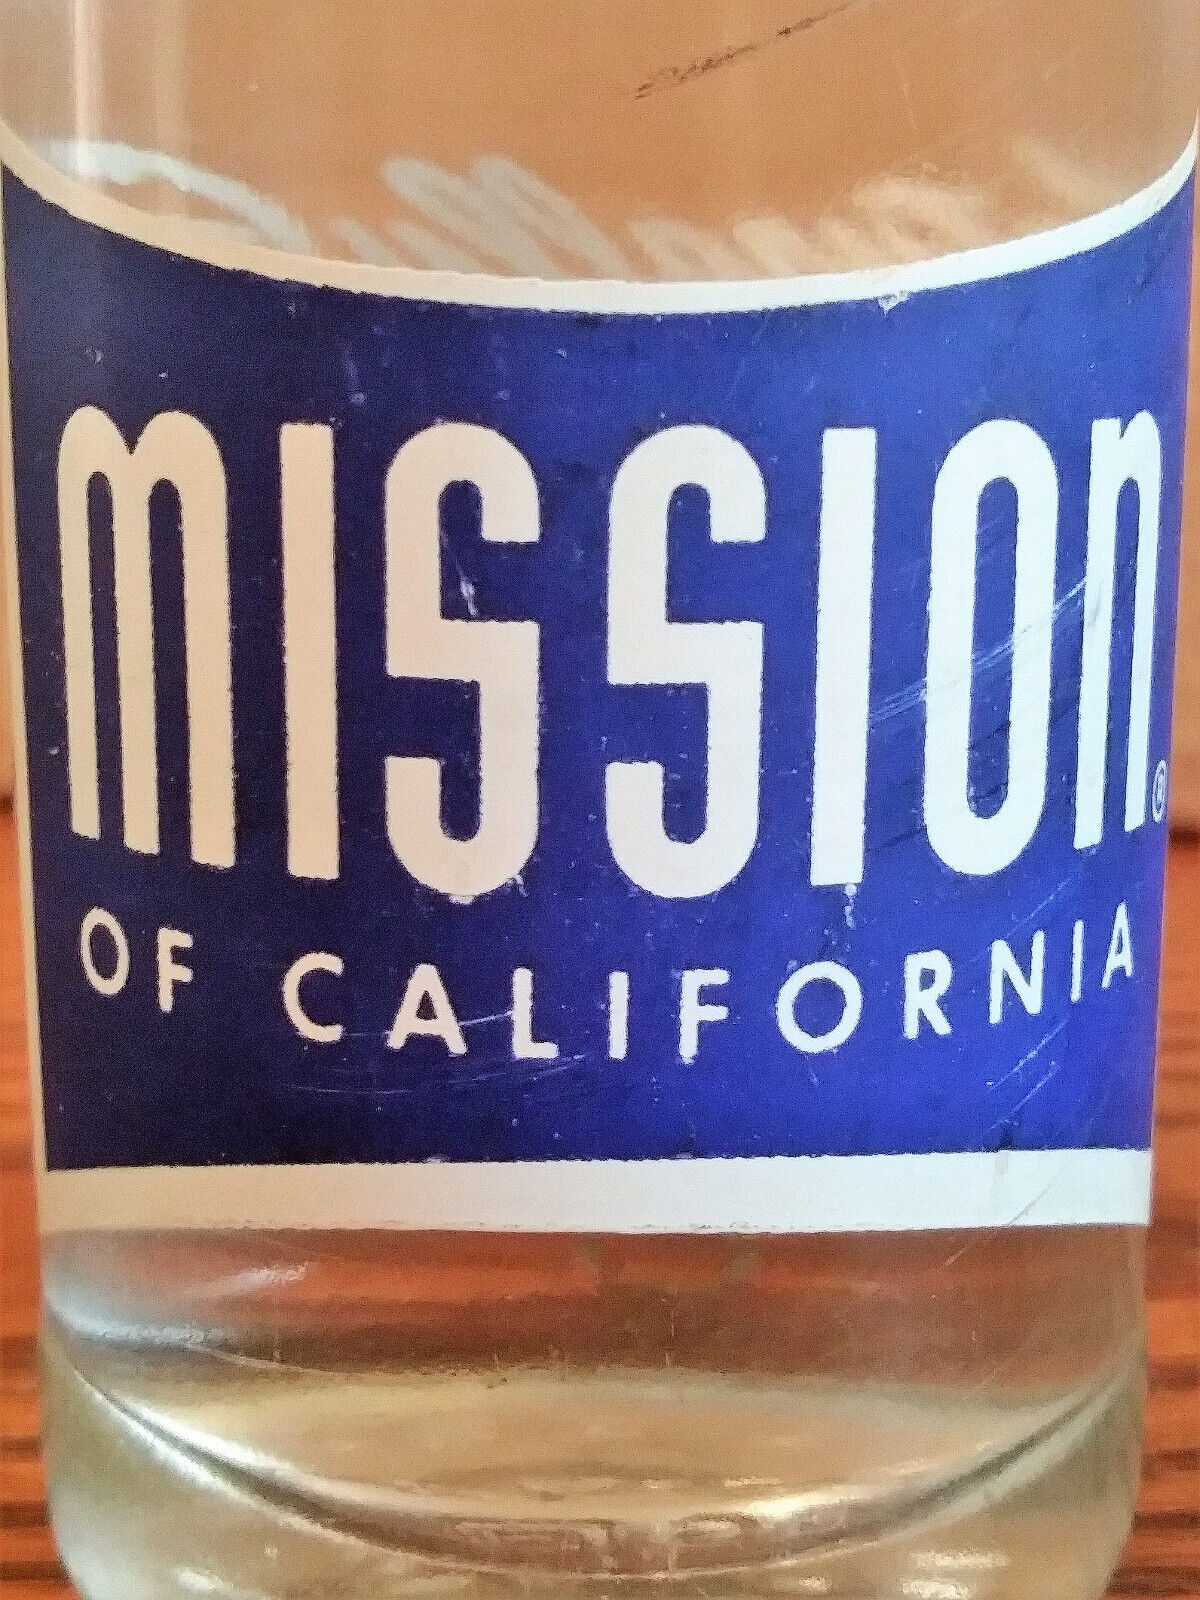 MISSION OF CALFORNIA; ACL SODA POP BOTTLE; 7OZ; BADEN, PA. 1960 (FULL)